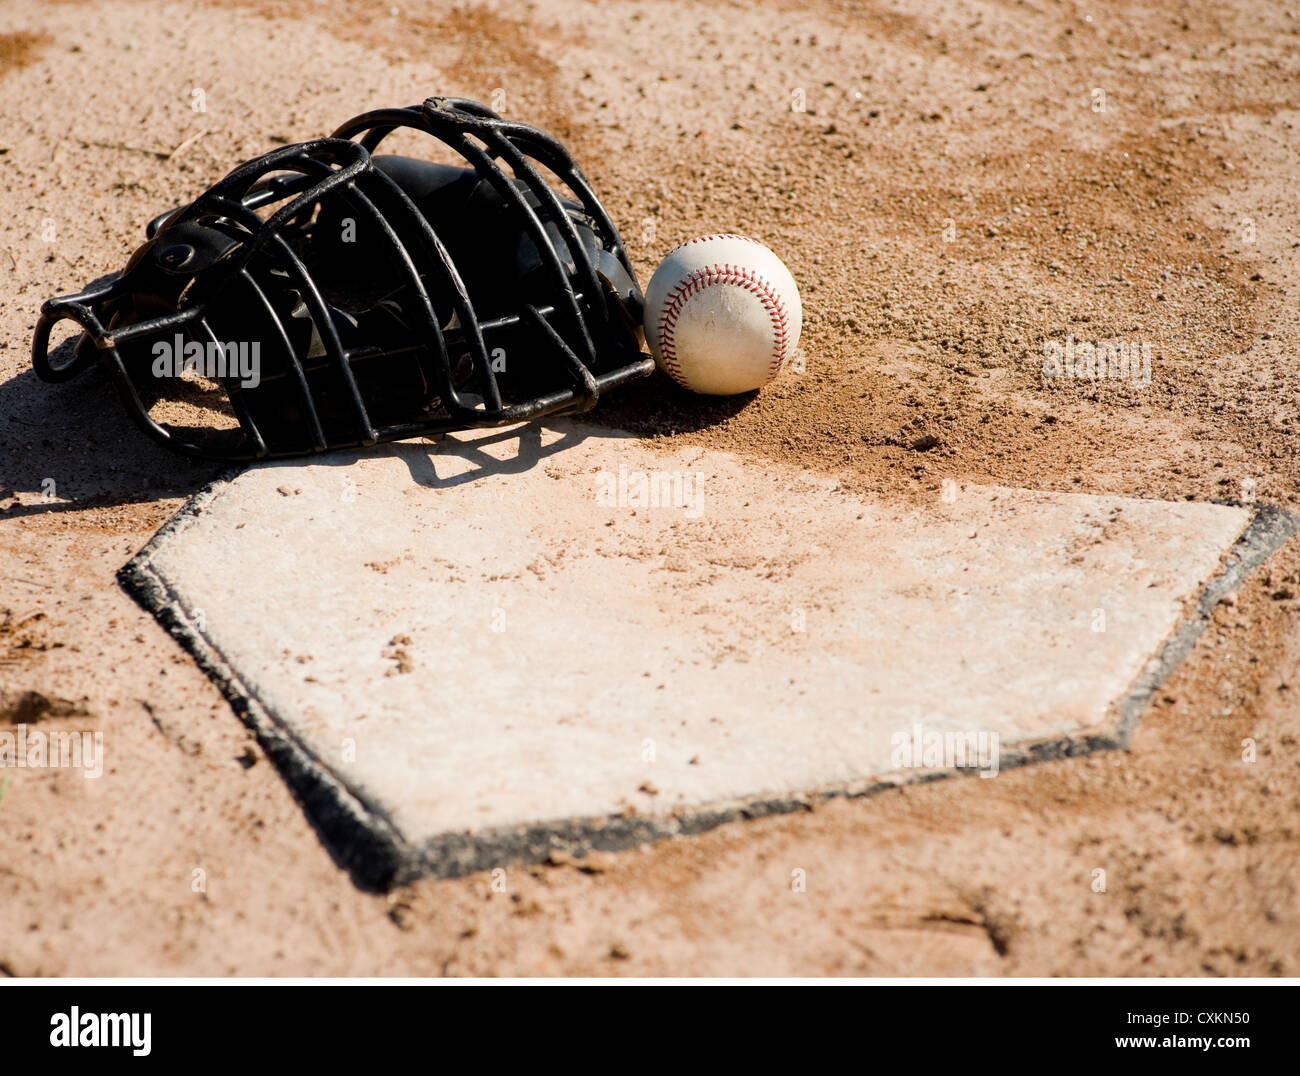 A baseball catcher's protective mask and baseball lying on home plate on a dirt baseball field Stock Photo